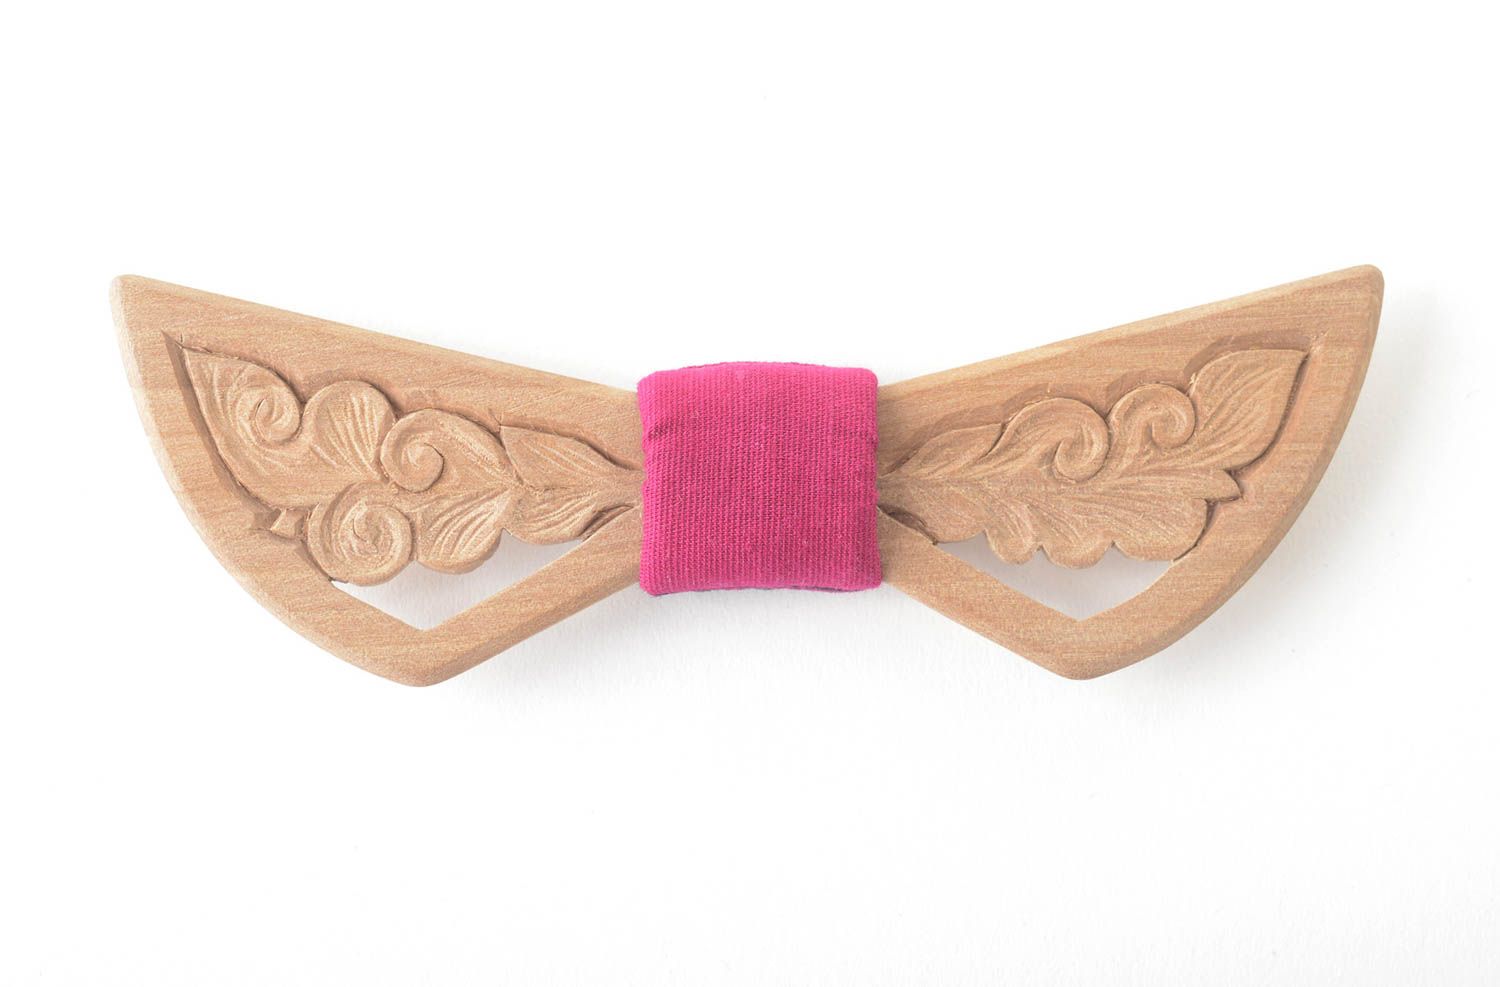 Handmade bow tie made of wood stylish bow ties for men present for boyfriend photo 2